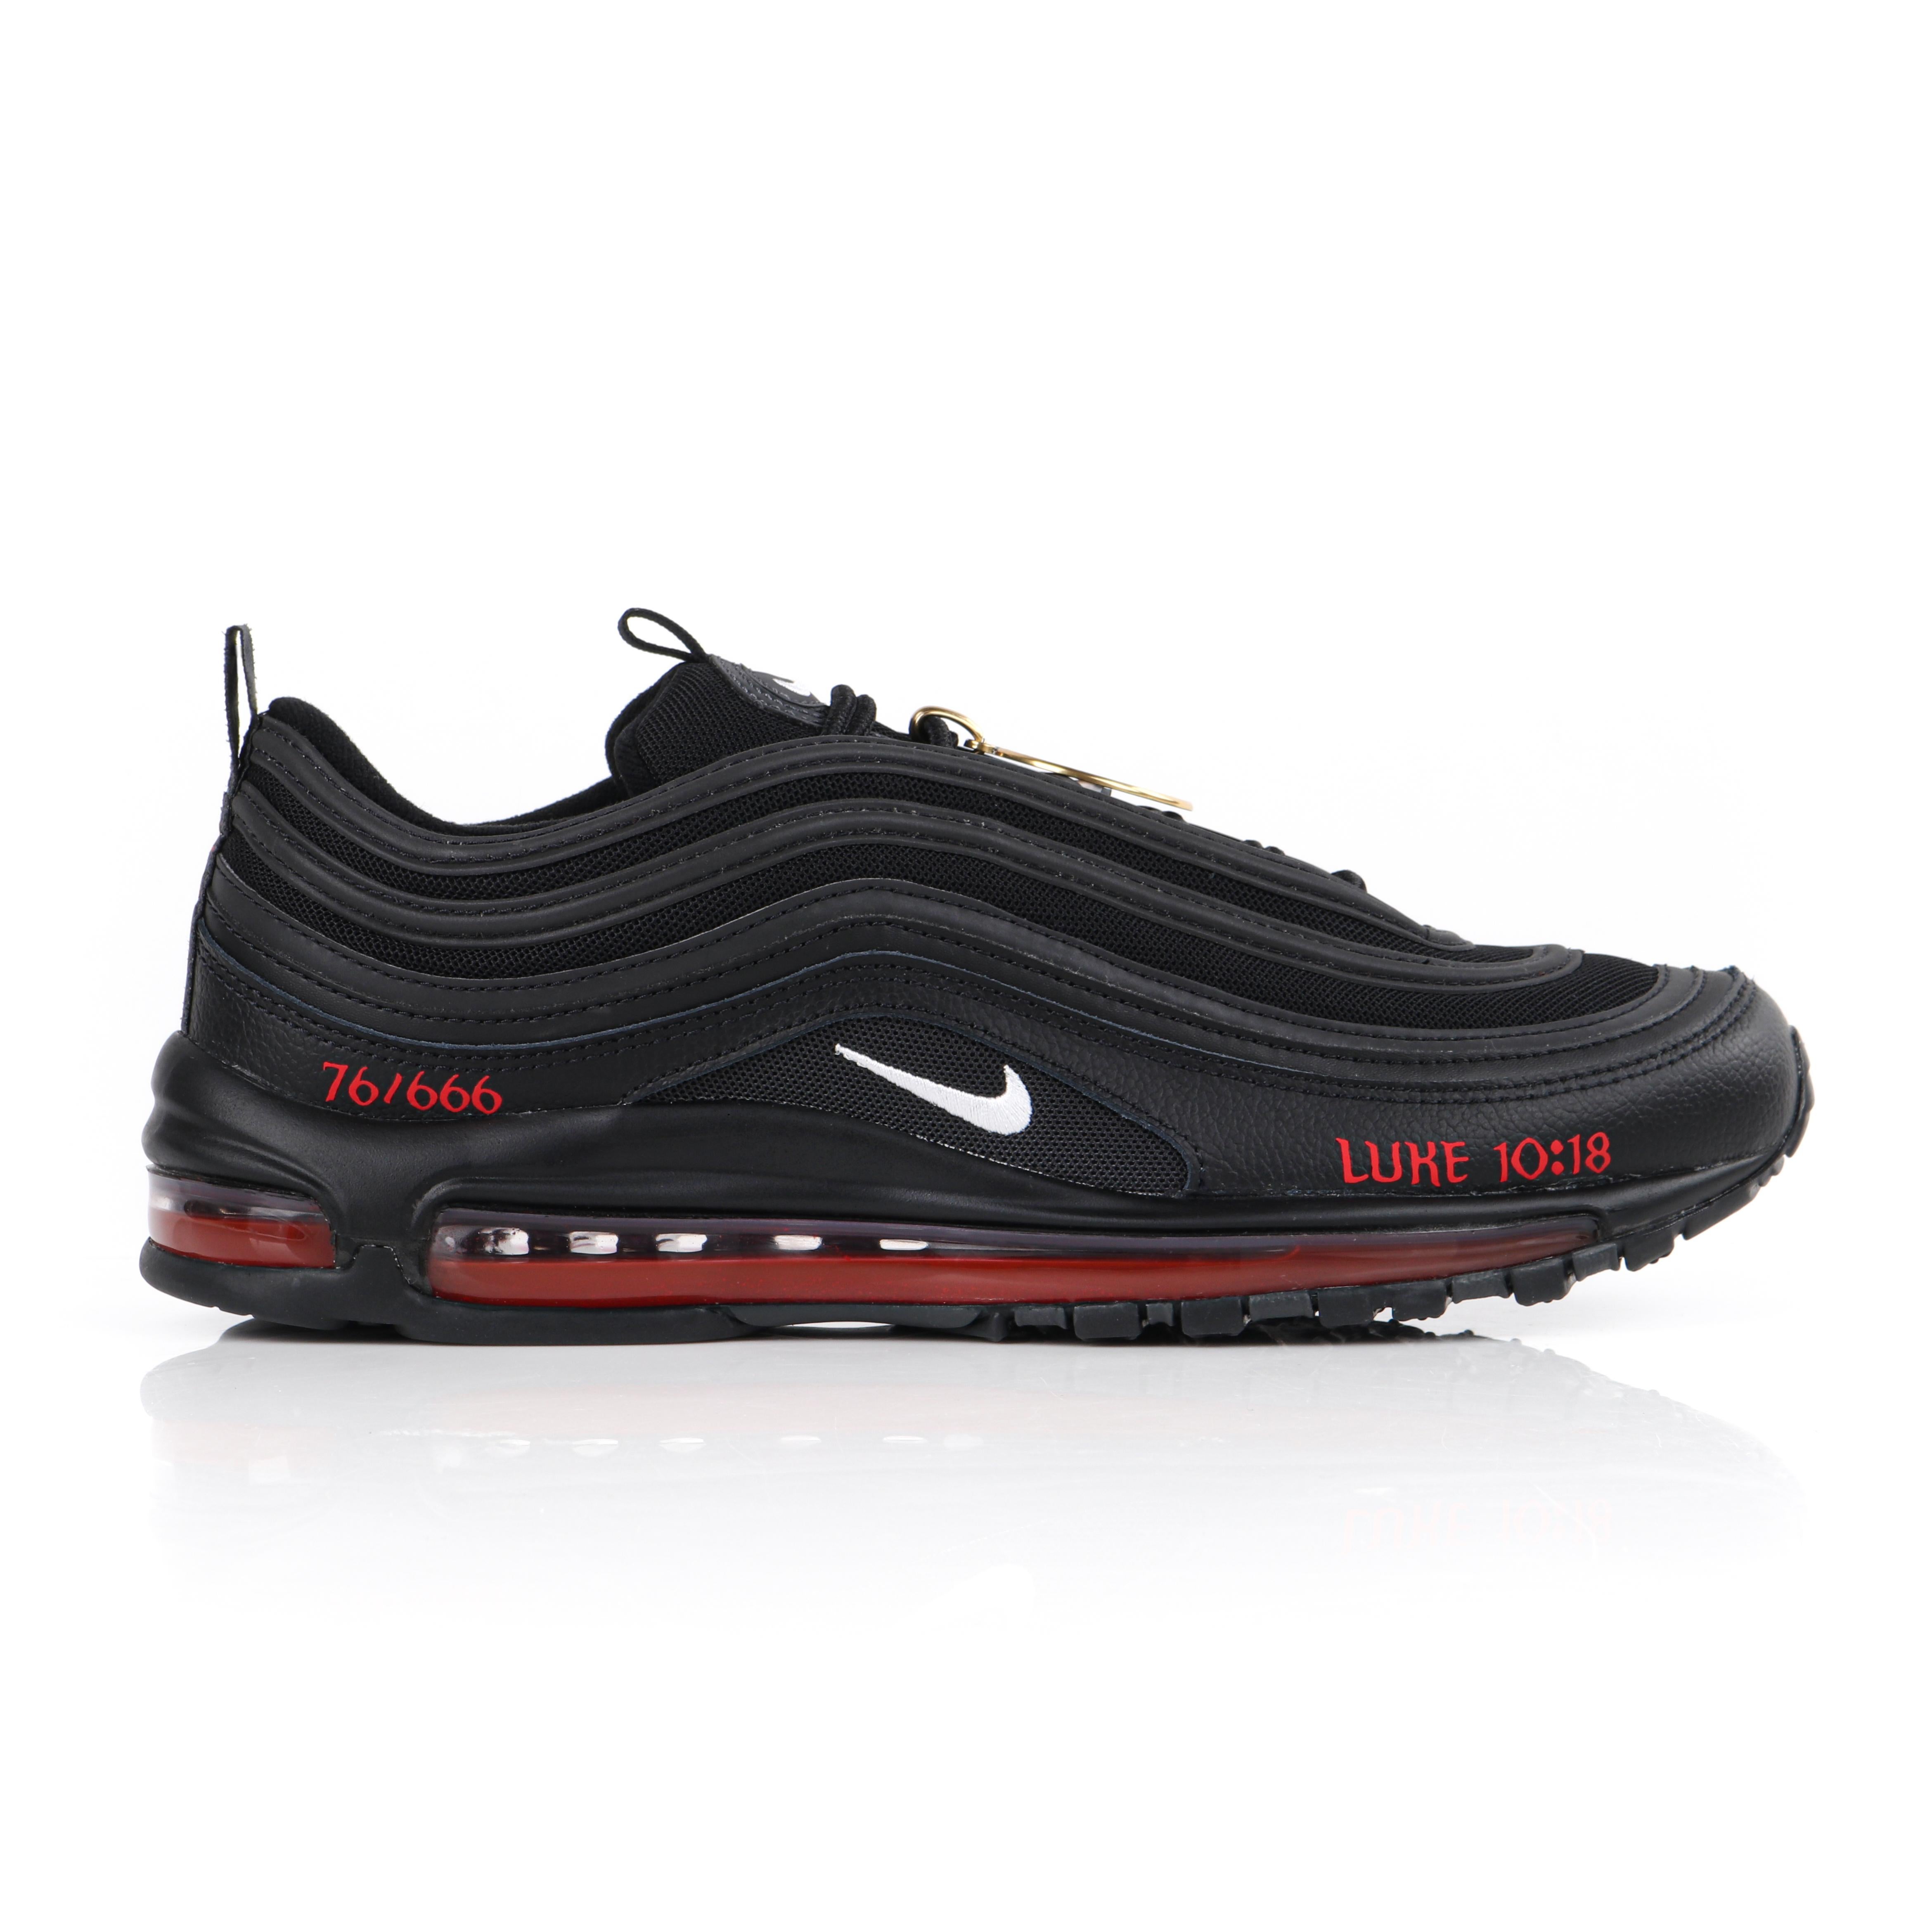 MSCHF and Lil Nas X “Satan” Limited Edition Black Nike Air Max Sneakers  76/666 NIB For Sale at 1stDibs | satan shoes nike, nike satan shoes, lil  nas x nike shoes